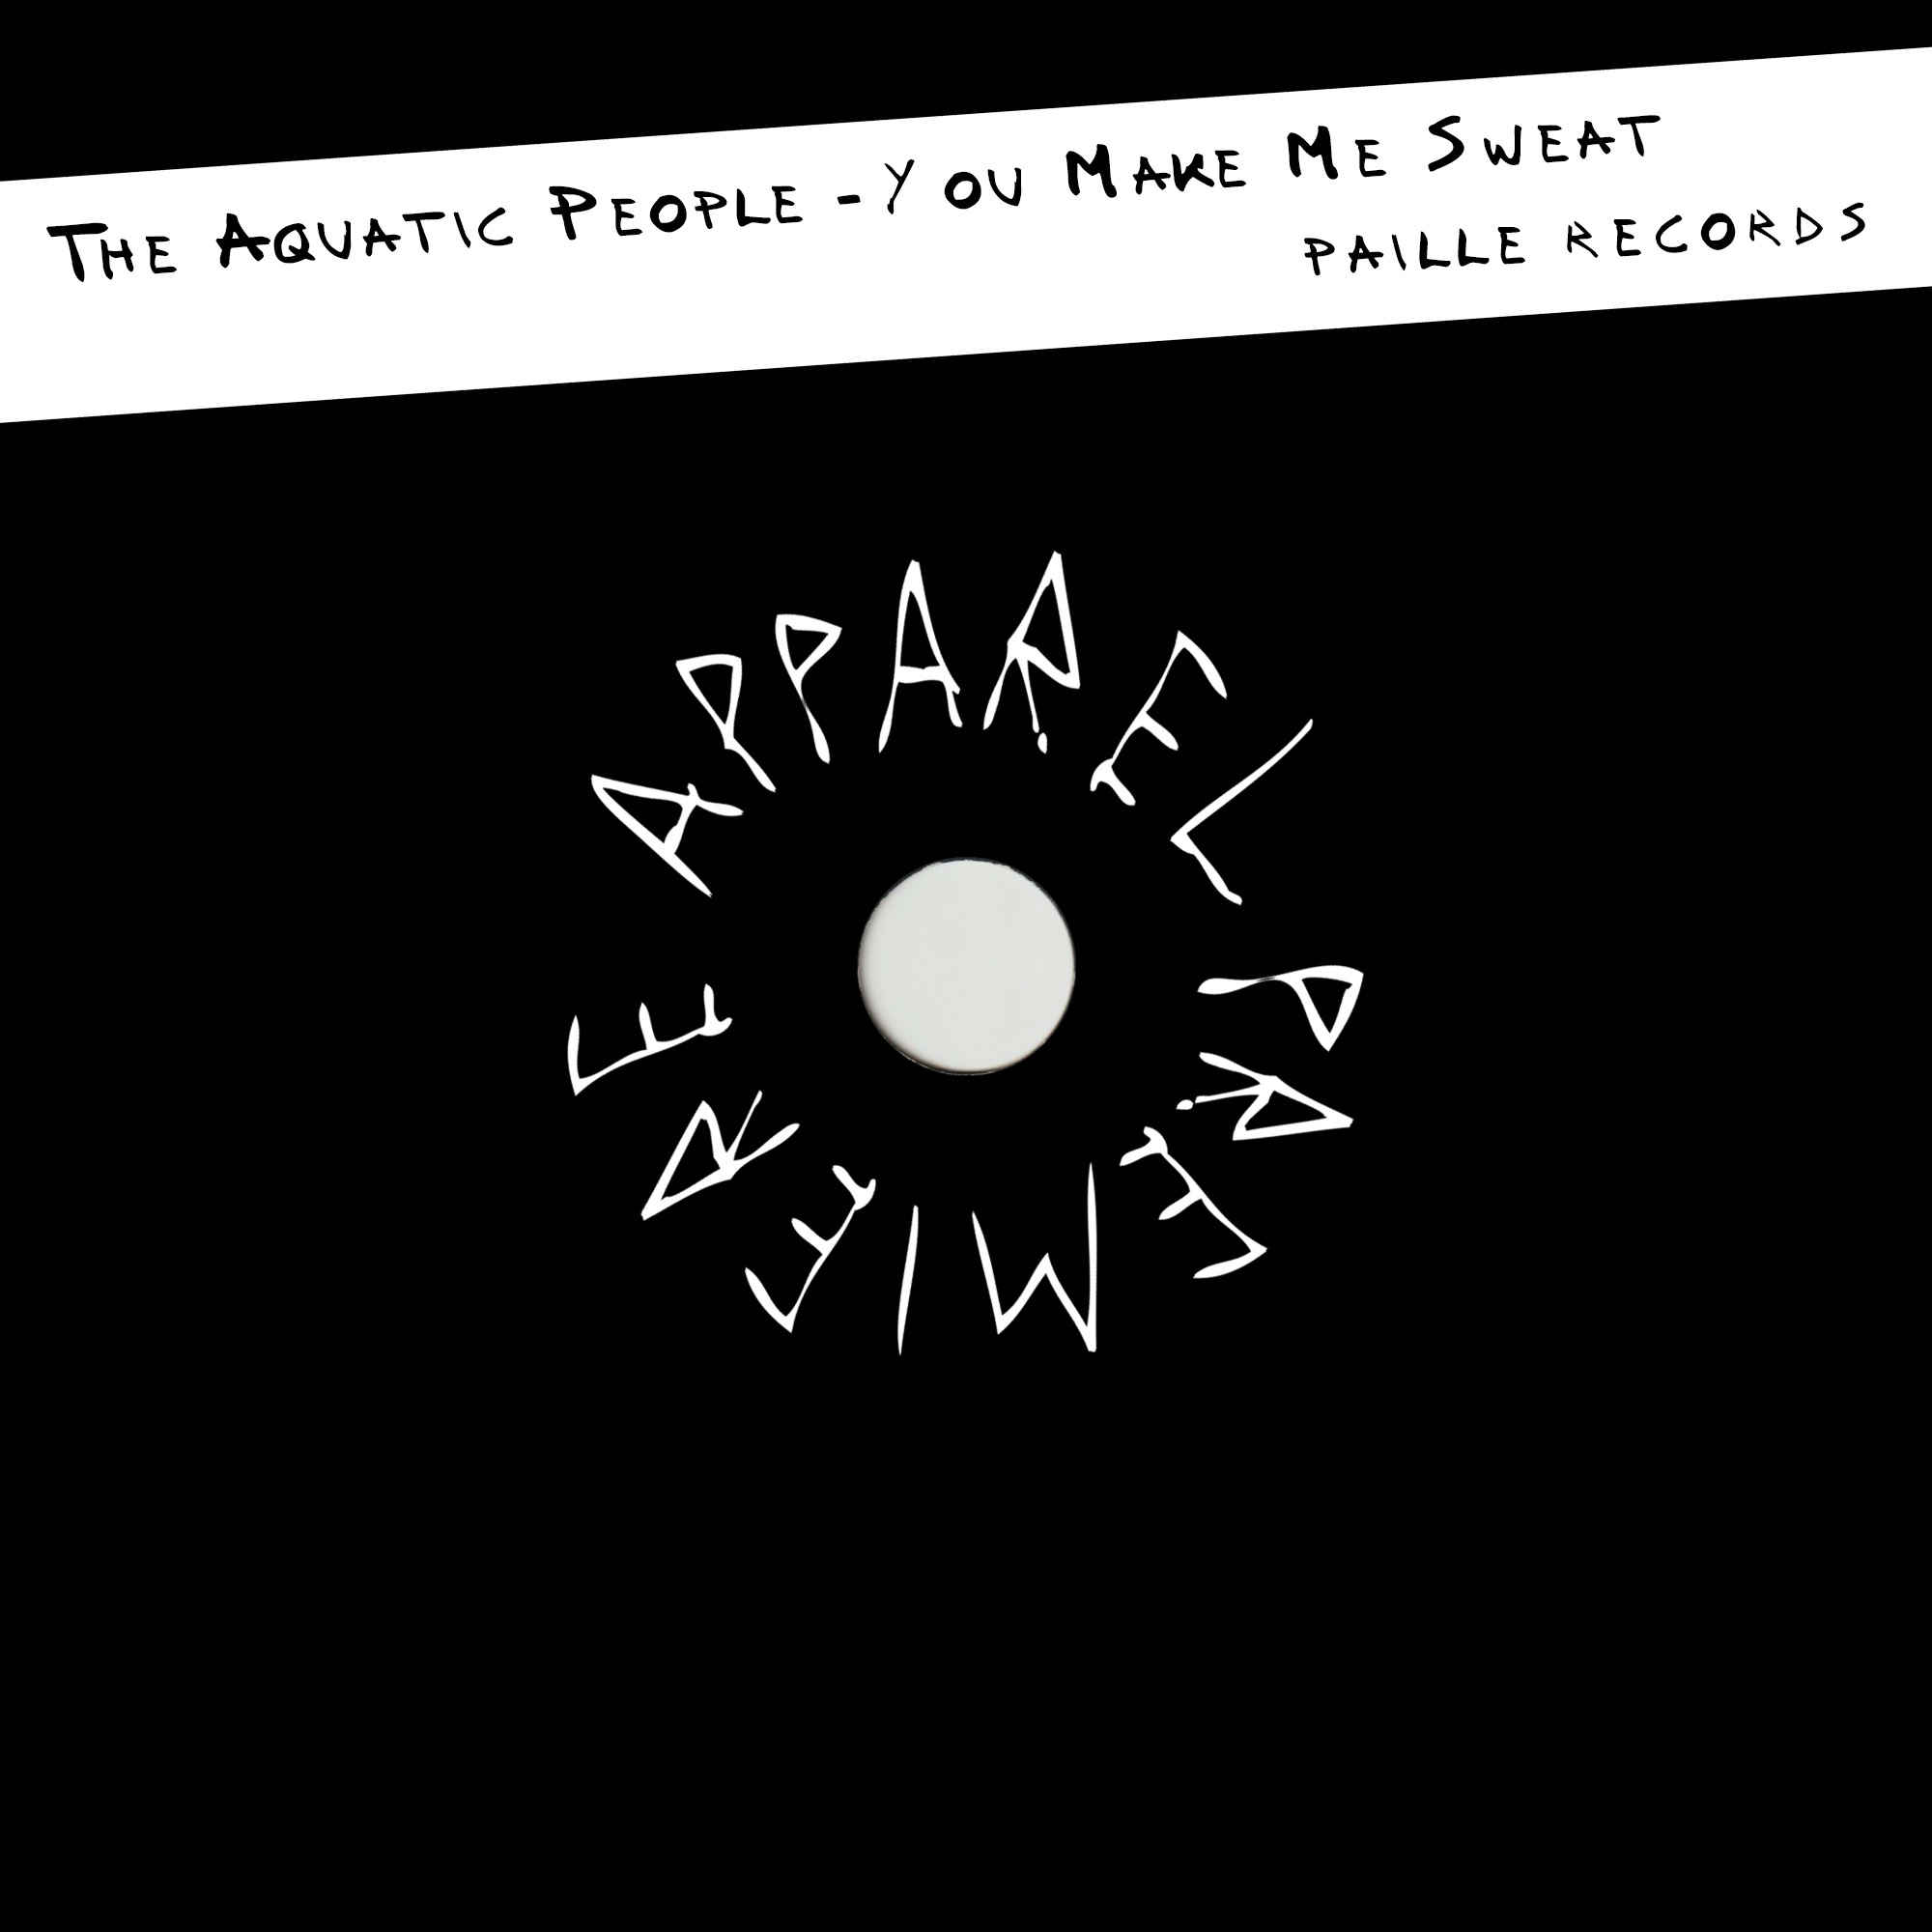 APPAREL PREMIERE The Aquatic People – You Make Me Sweat [Paille Records]